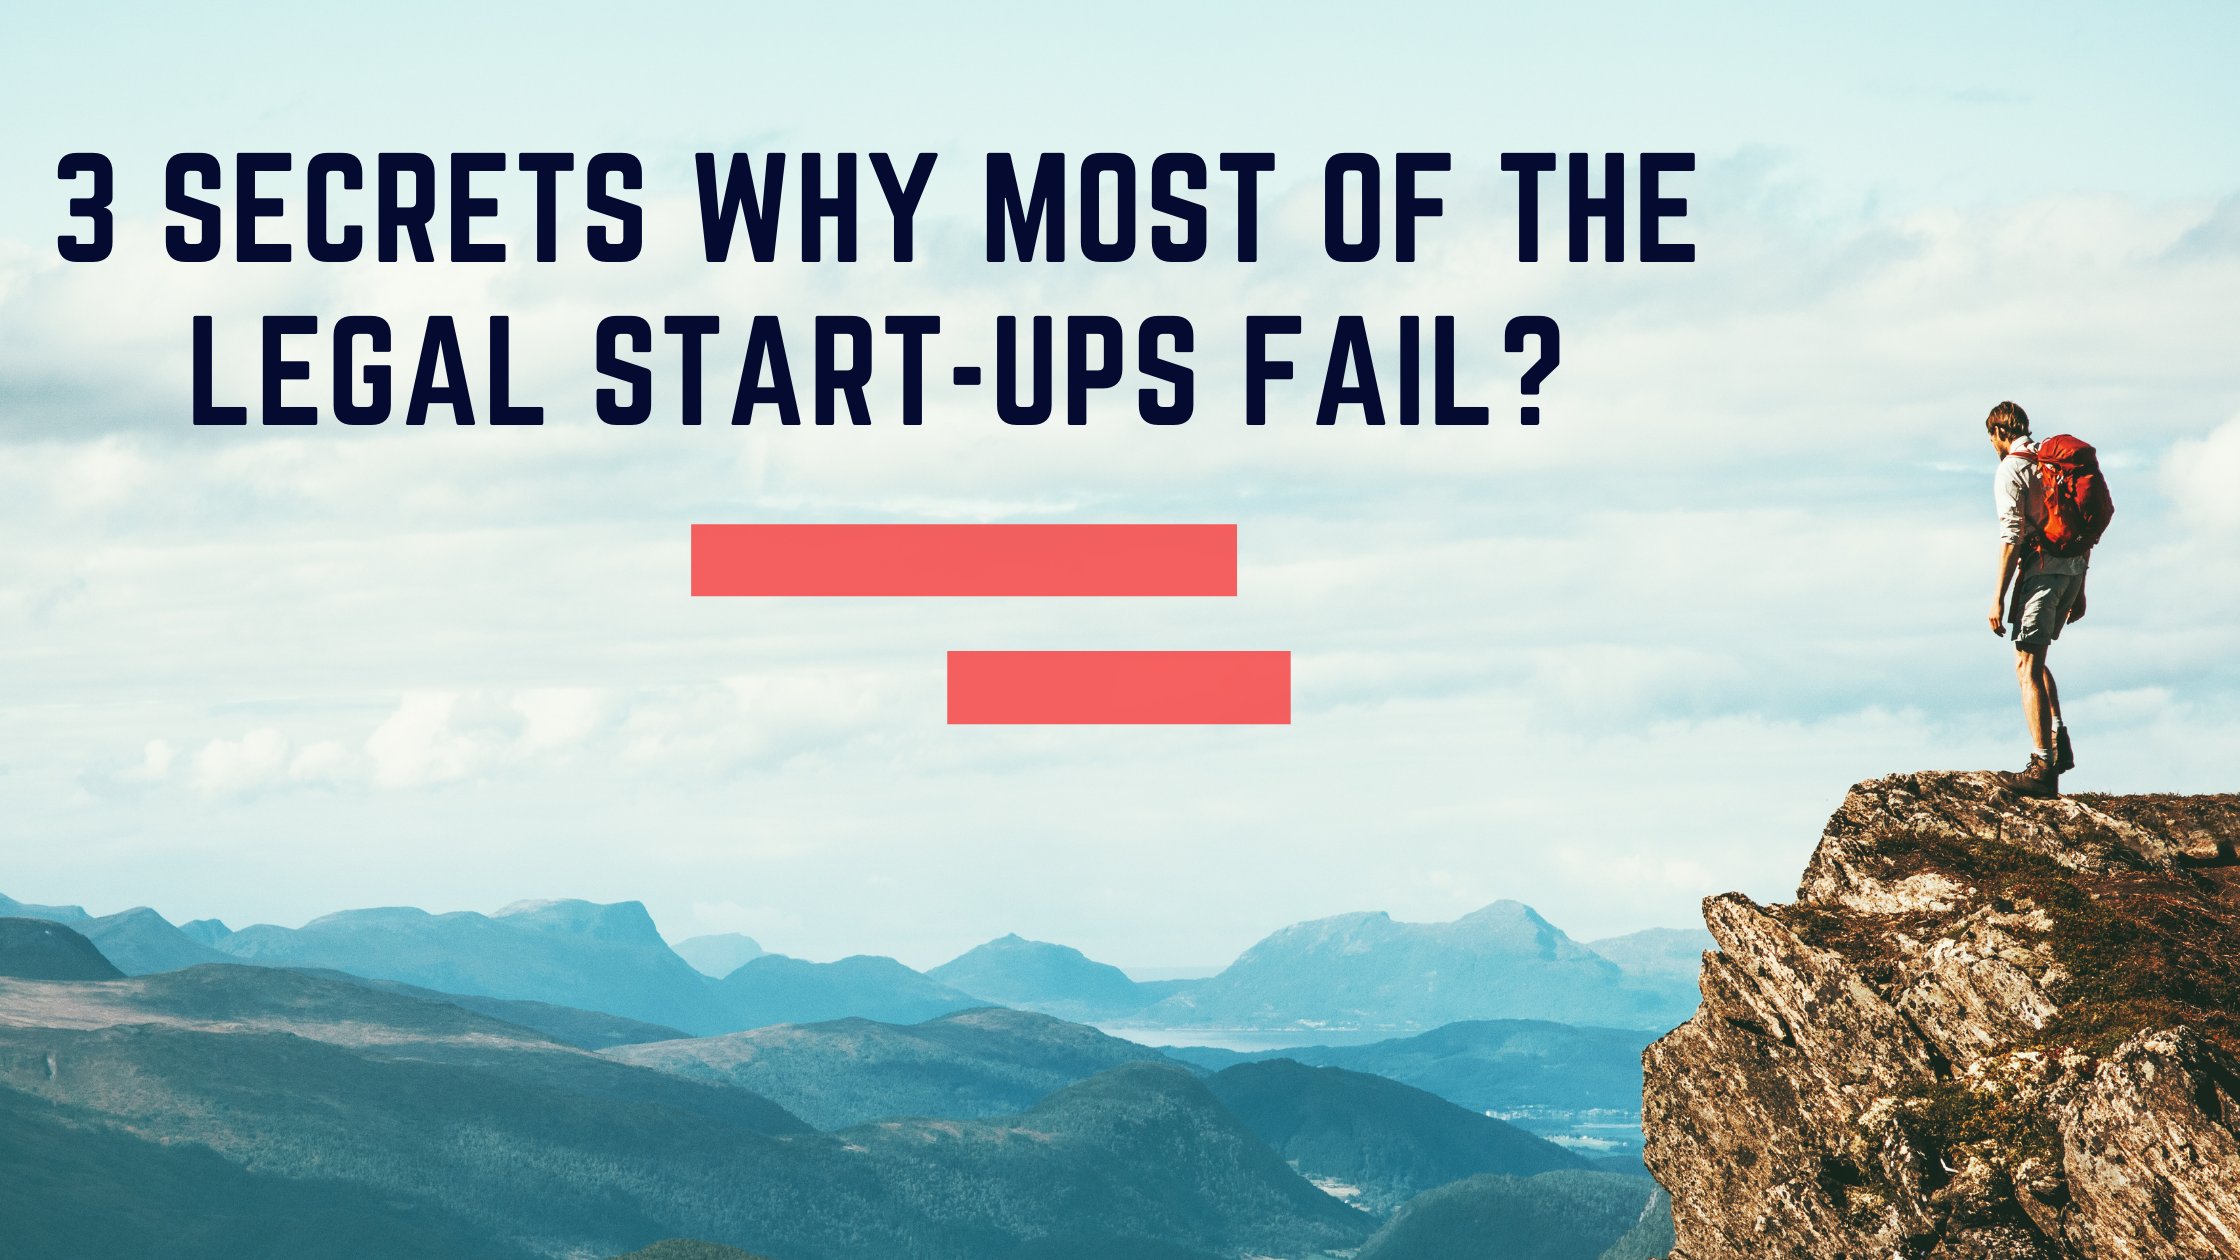 3 SECRETS WHY MOST OF THE LEGAL START-UPS FAIL?